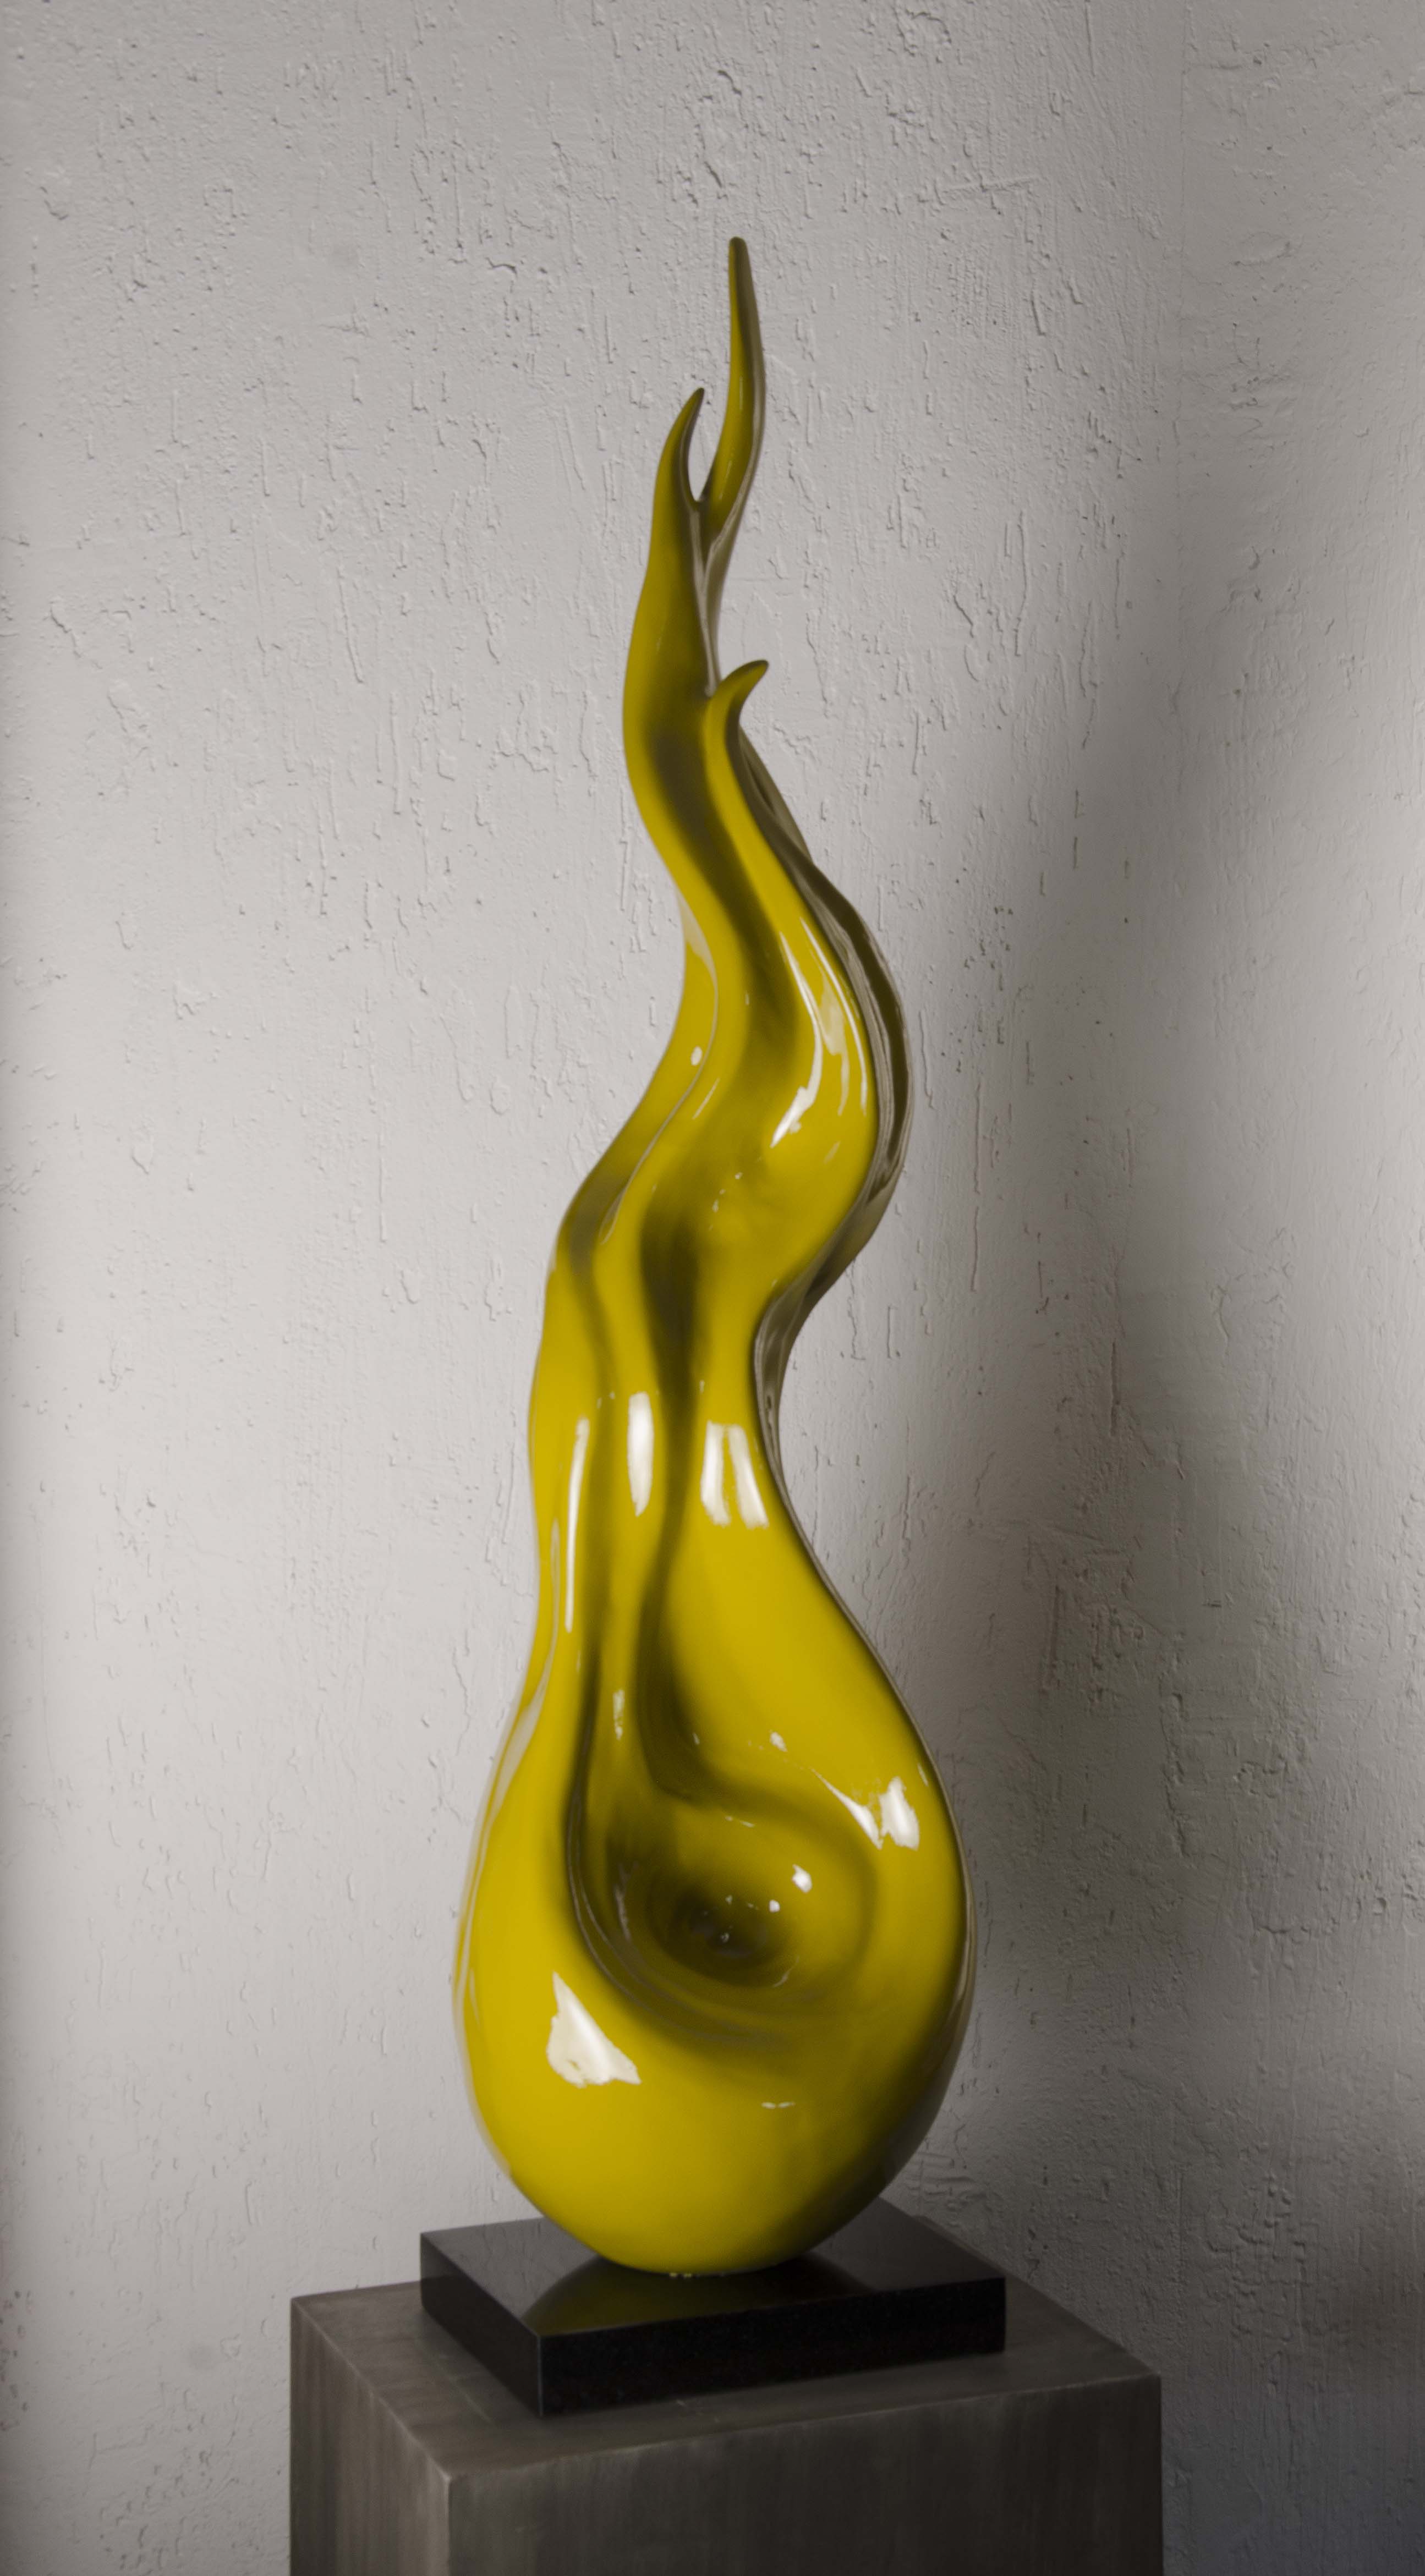 The Yellow Flame, Edition 1/1